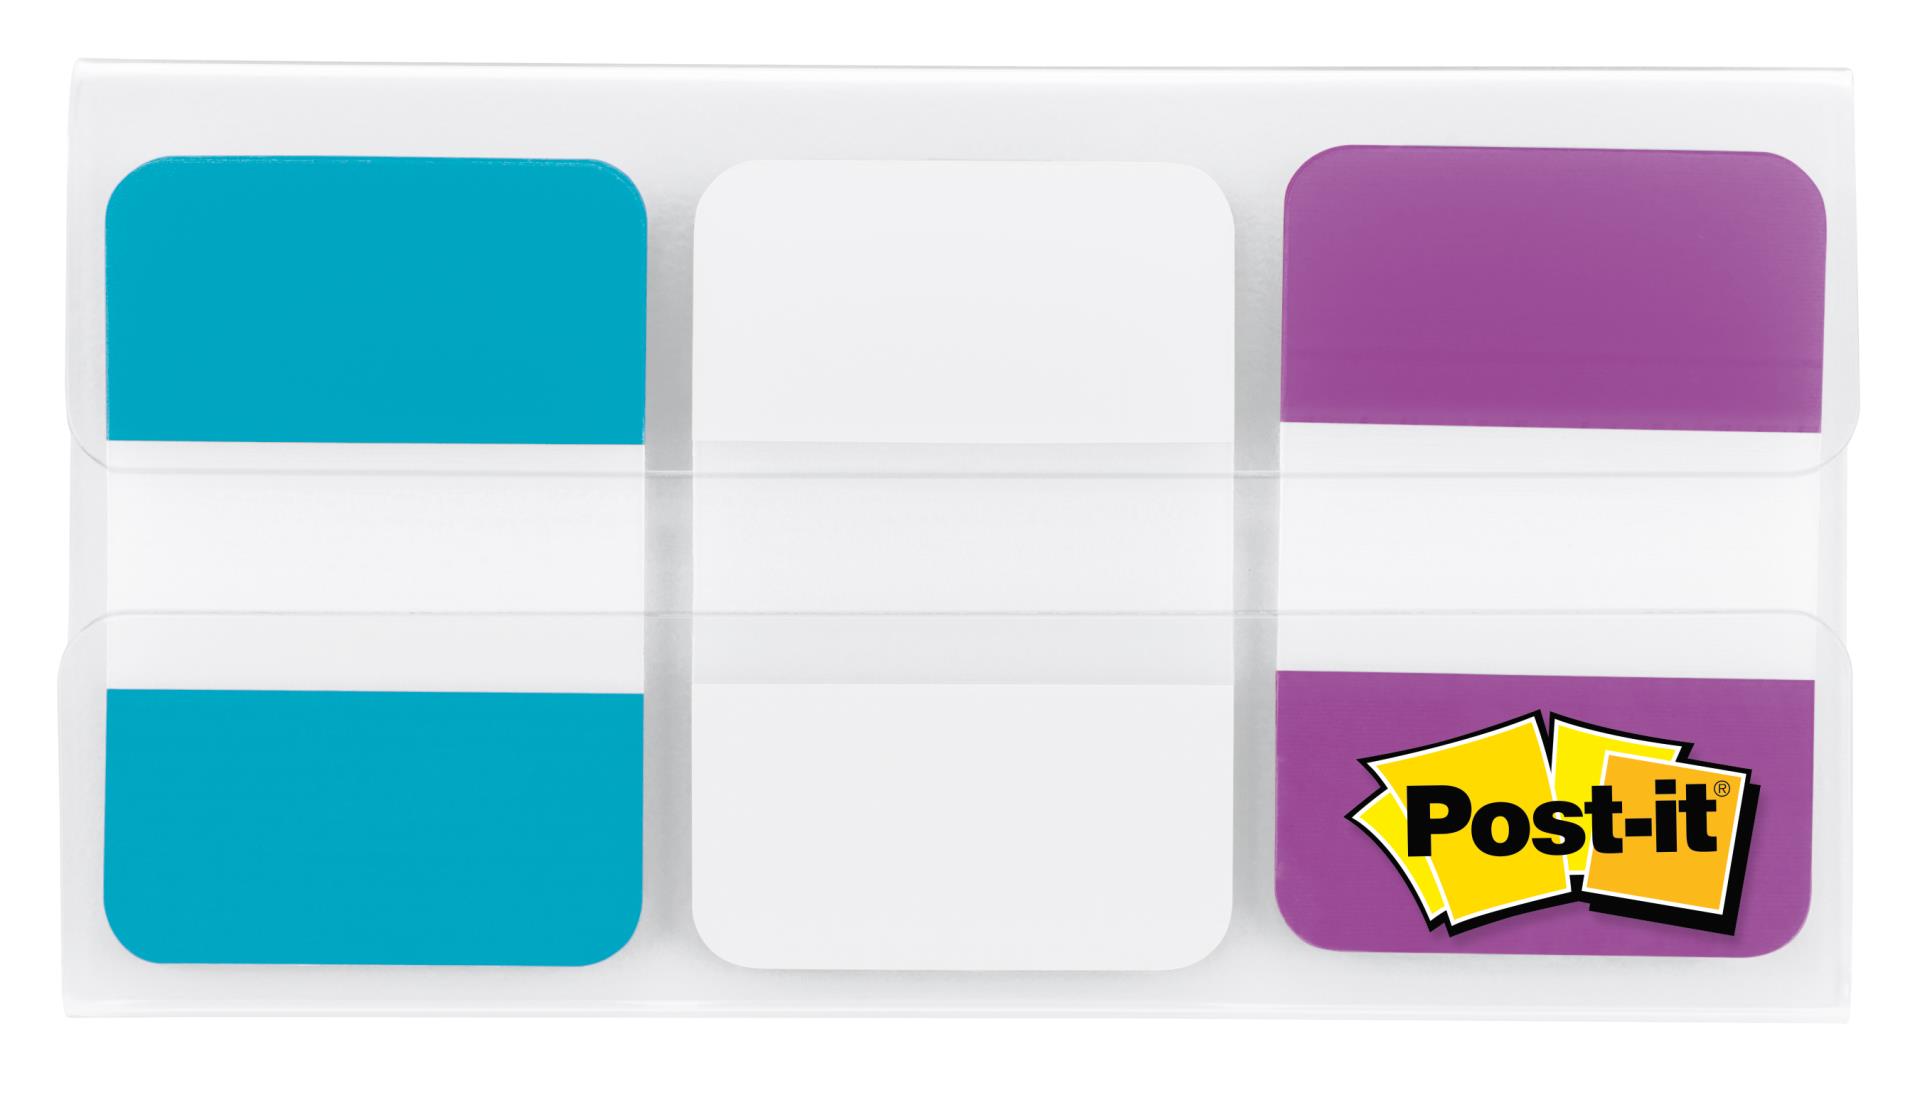 7100093040 - Post-it® Tabs 686-AWV, 1 in. x 1.5 in. (25,4 mm x 38,1 mm)